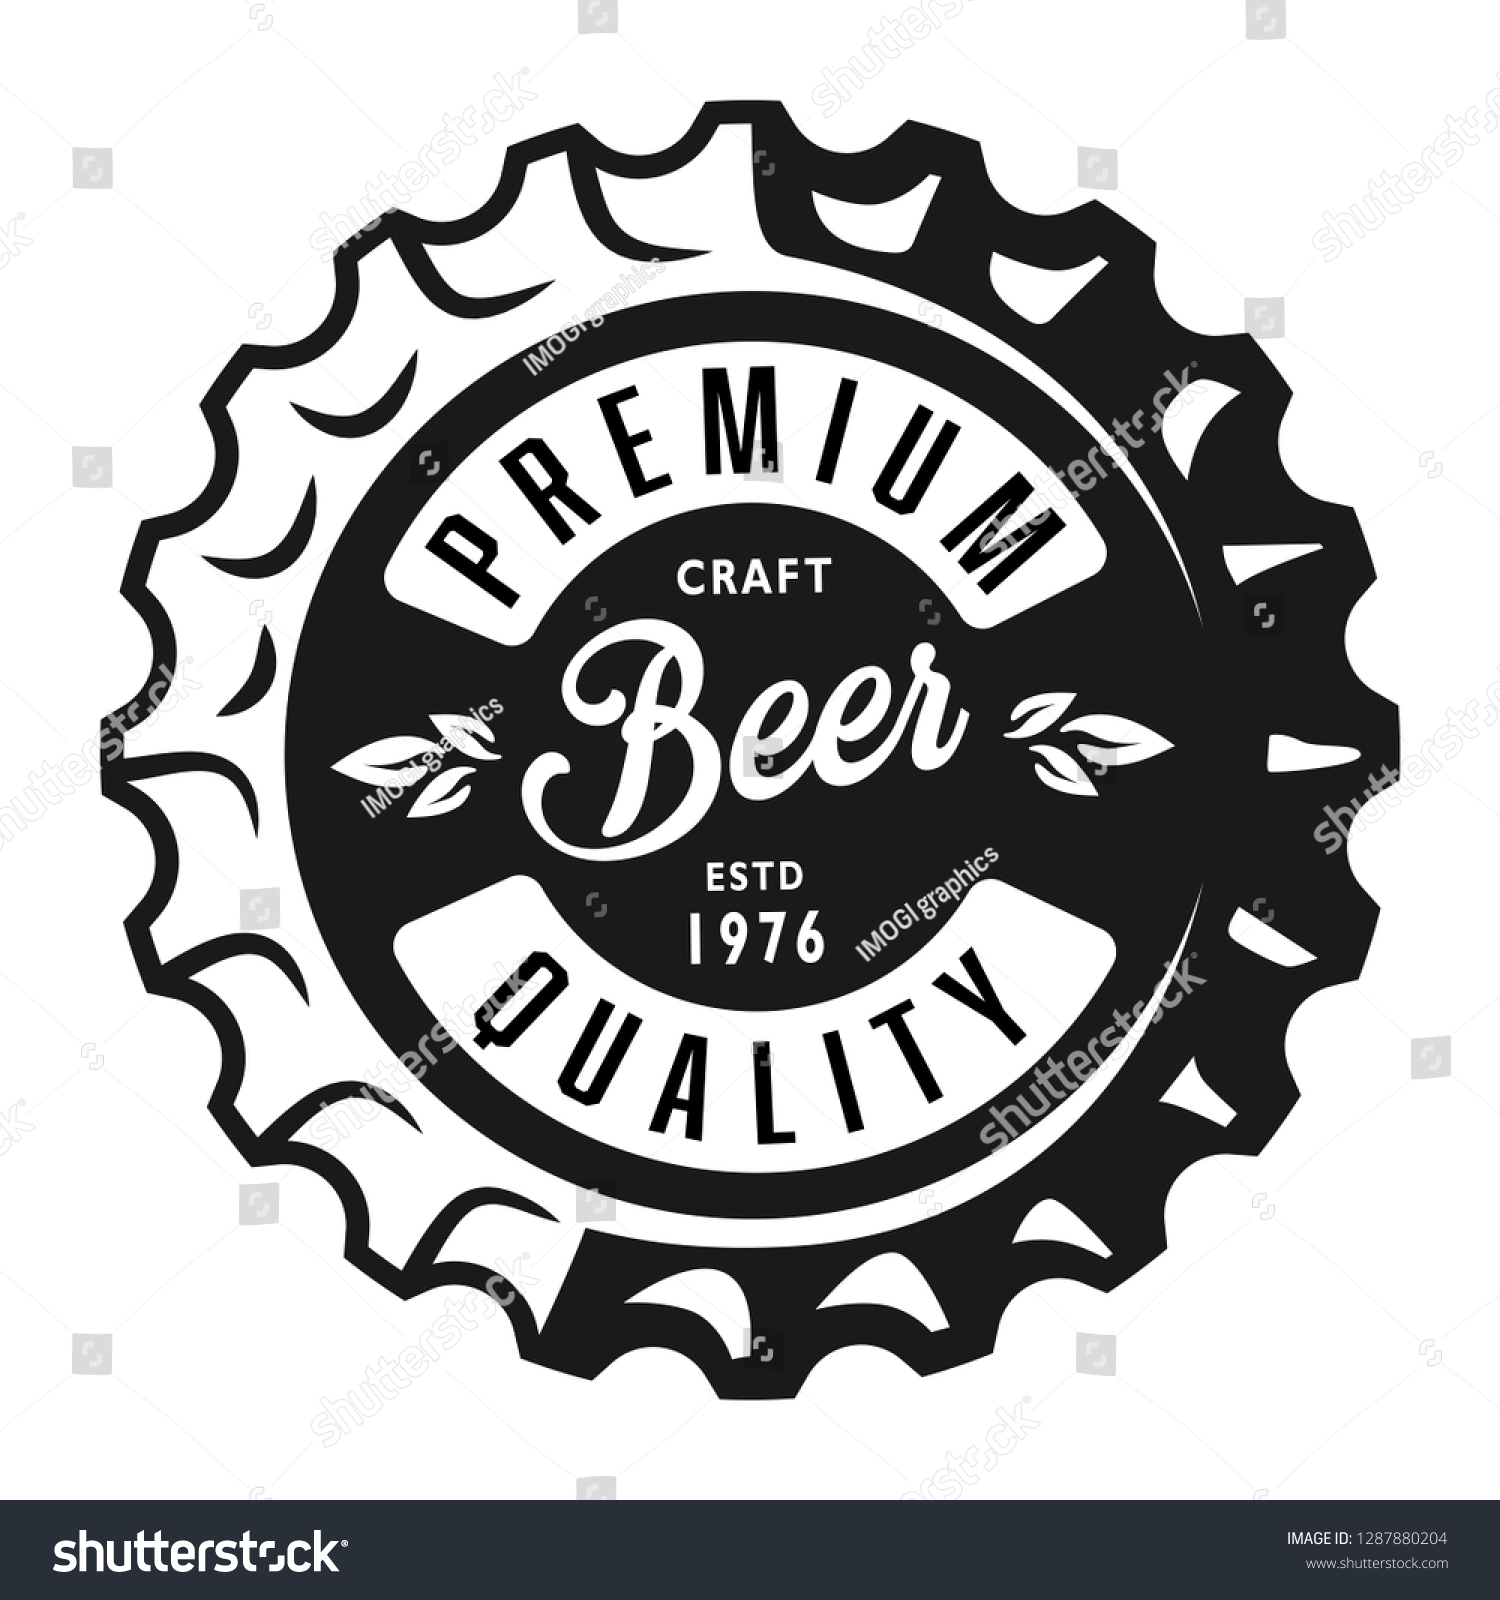 Vintage monochrome lager beer label with inscriptions on bottle cap isolated  illustration #1287880204